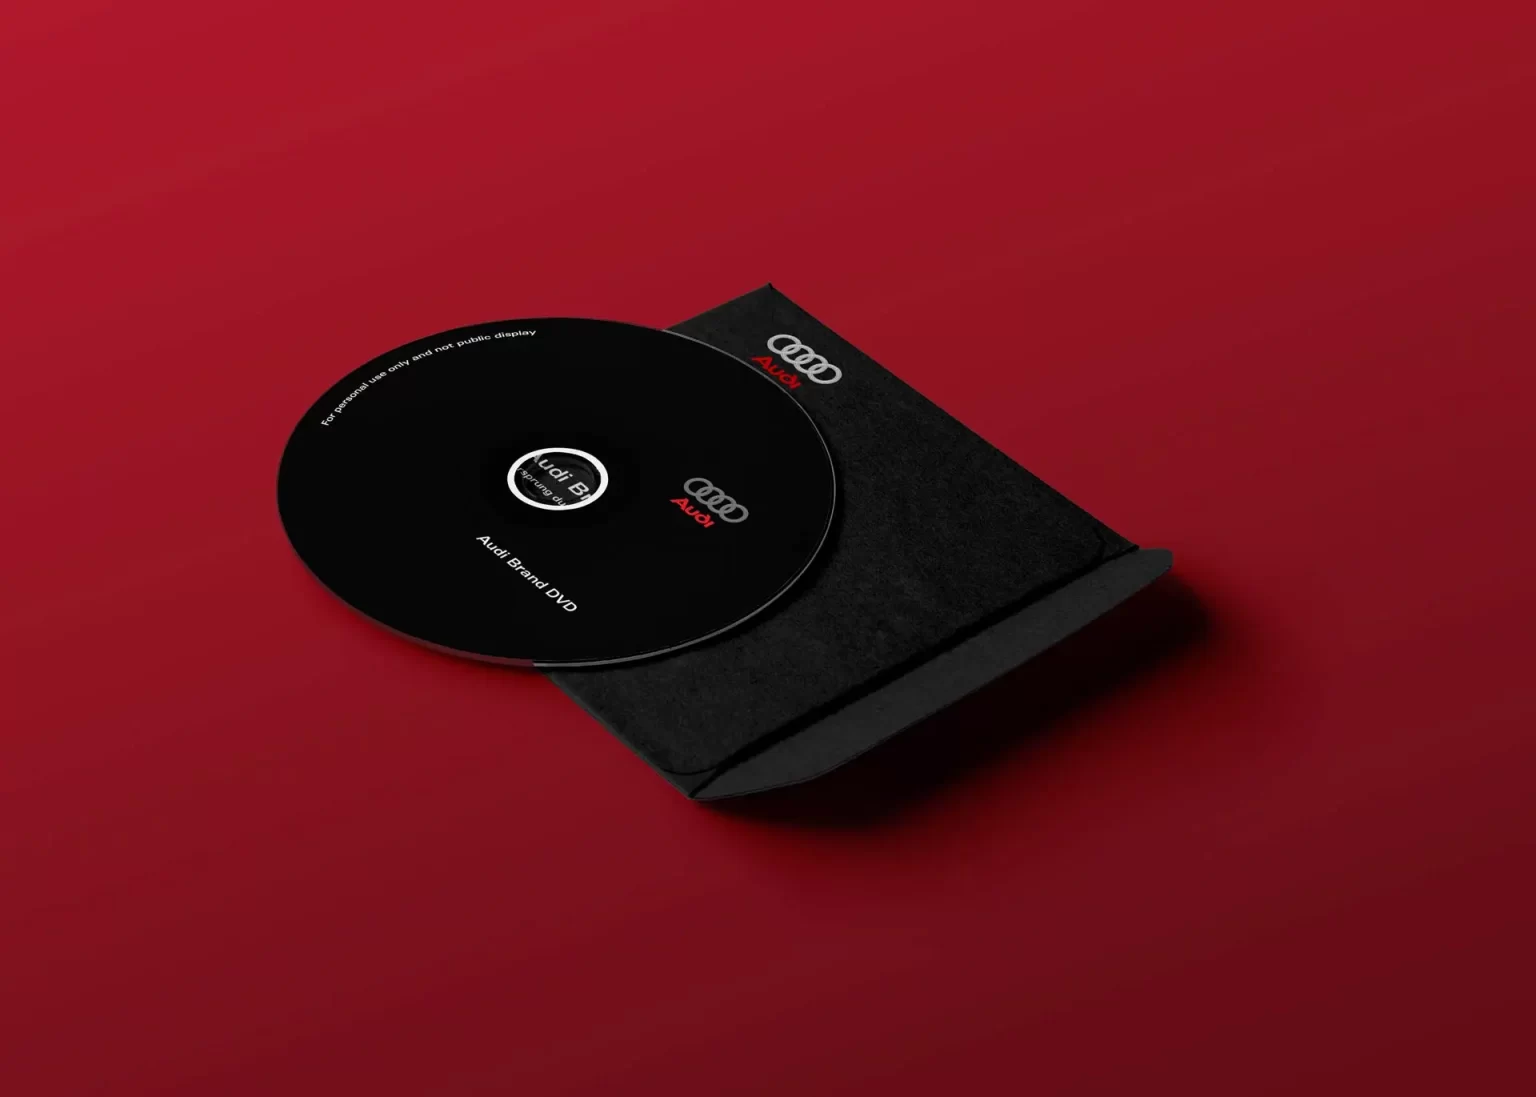 A black DVD labeled "Audi Brand DVD" is partially out of a black case on a red background.